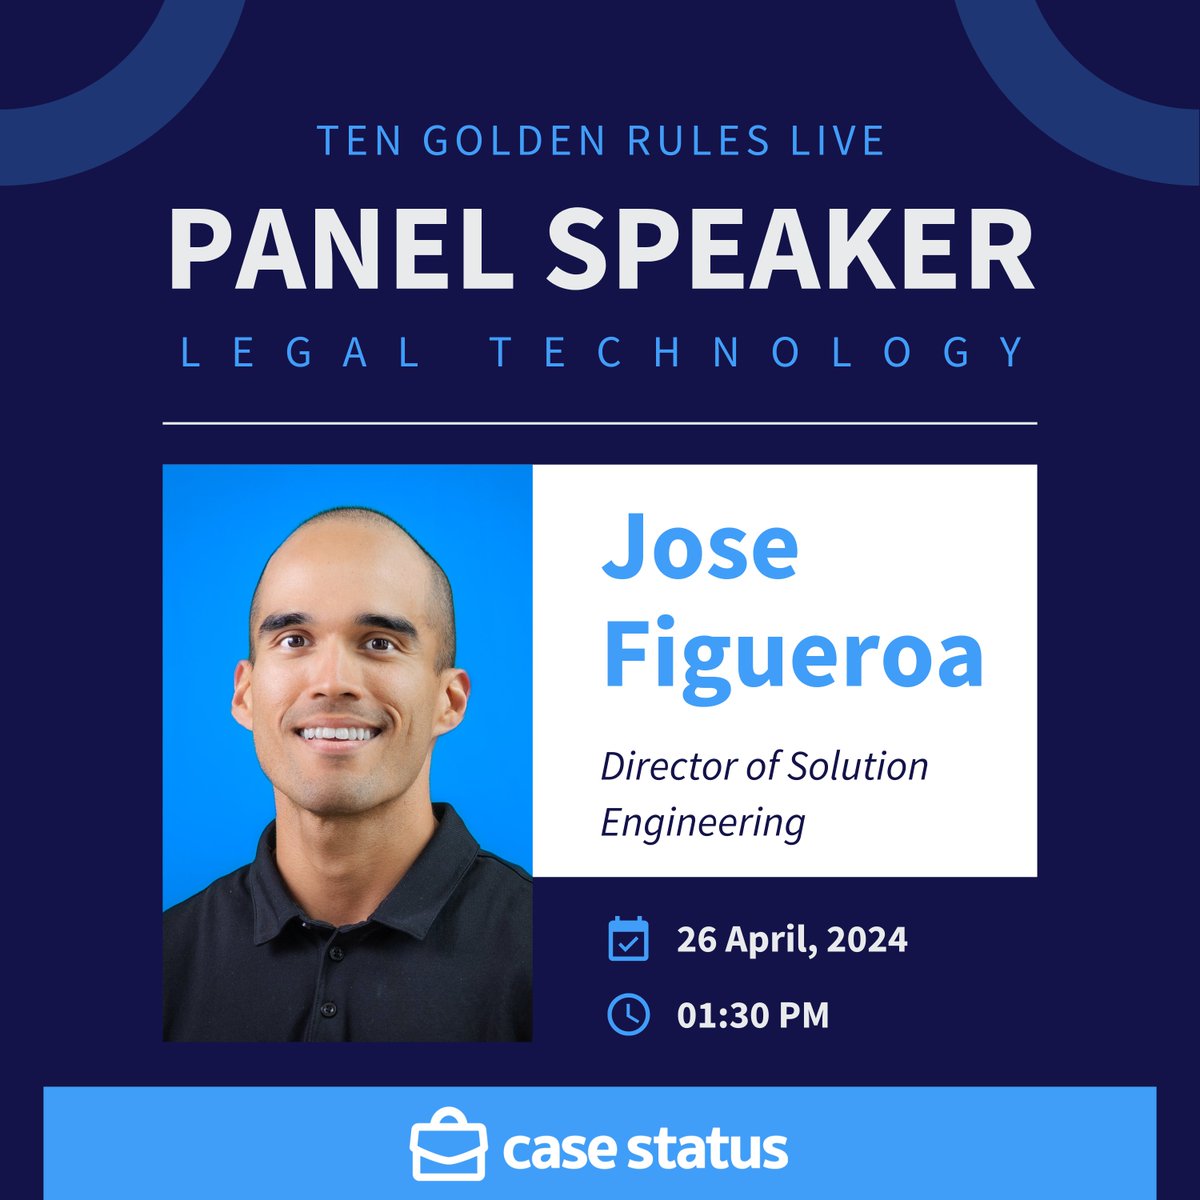 We are beyond excited to announce that our very own Jose Figueroa, director of Solution Engineering, will be a featured speaker on the technology panel at the upcoming Ten Golden Rules Live conference! 

Learn more: hubs.ly/Q02tQr0w0

#legalmarketing #techtalk #legaltech